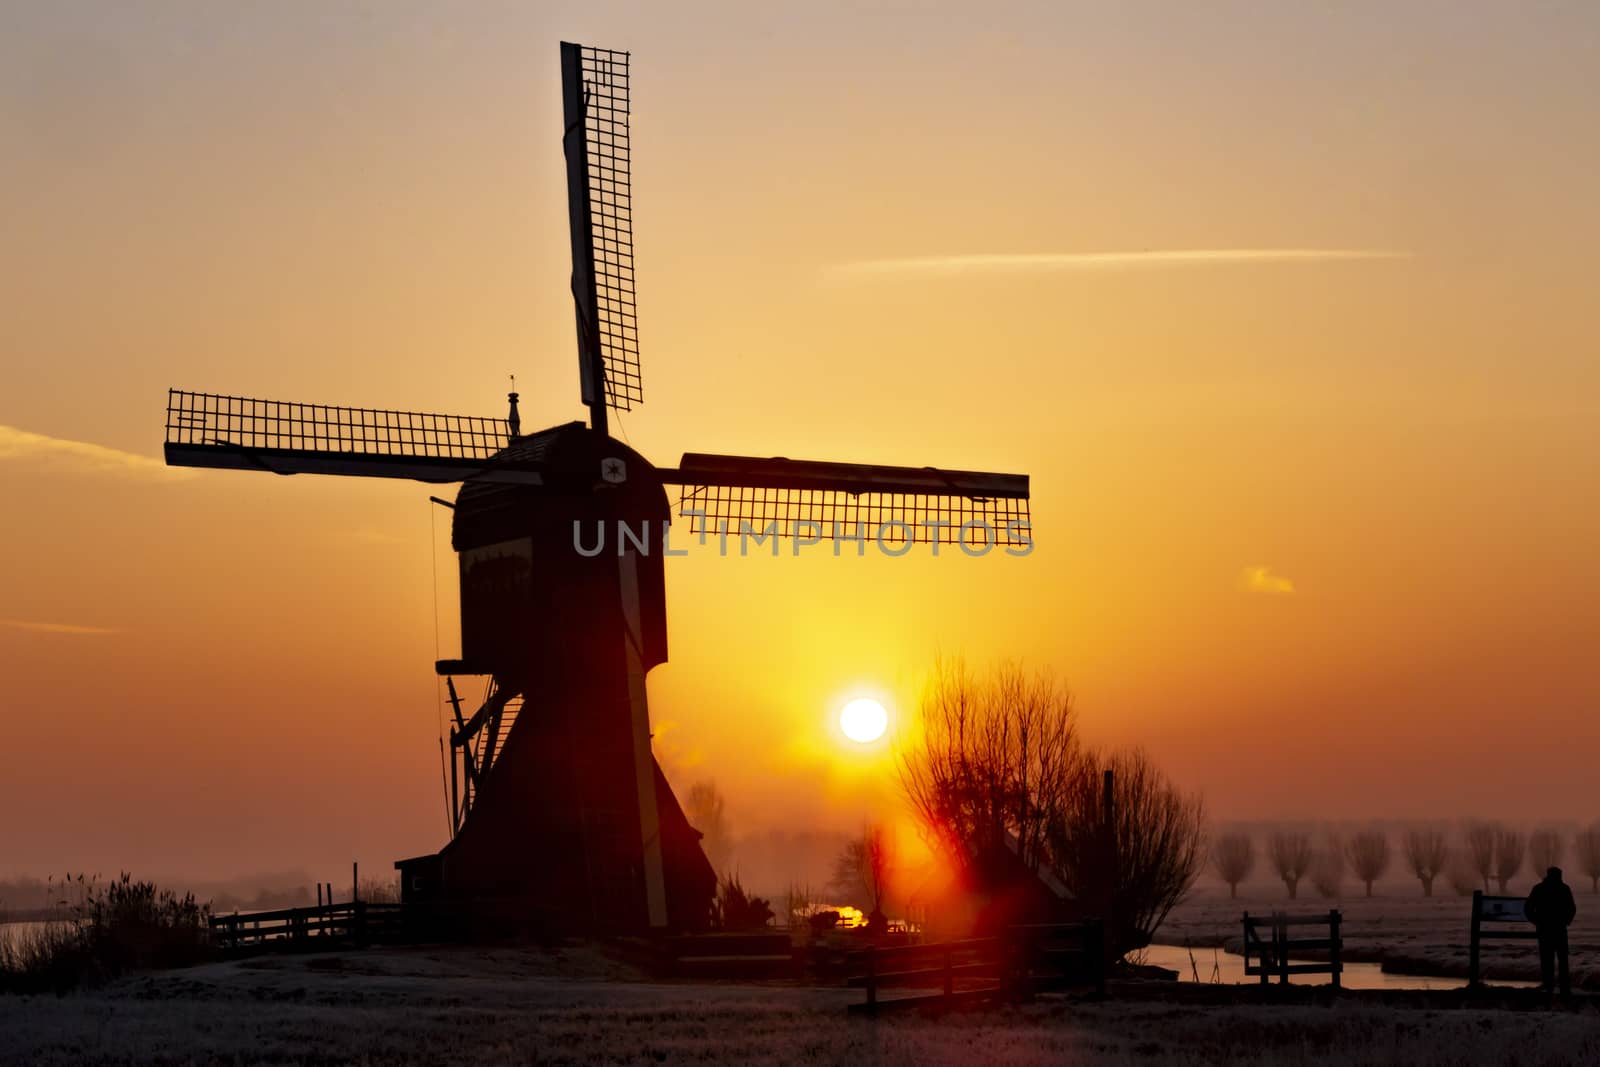 Typical Dutch rural landscape with windmill silhouettes at the early morning sunrise in Netherlands